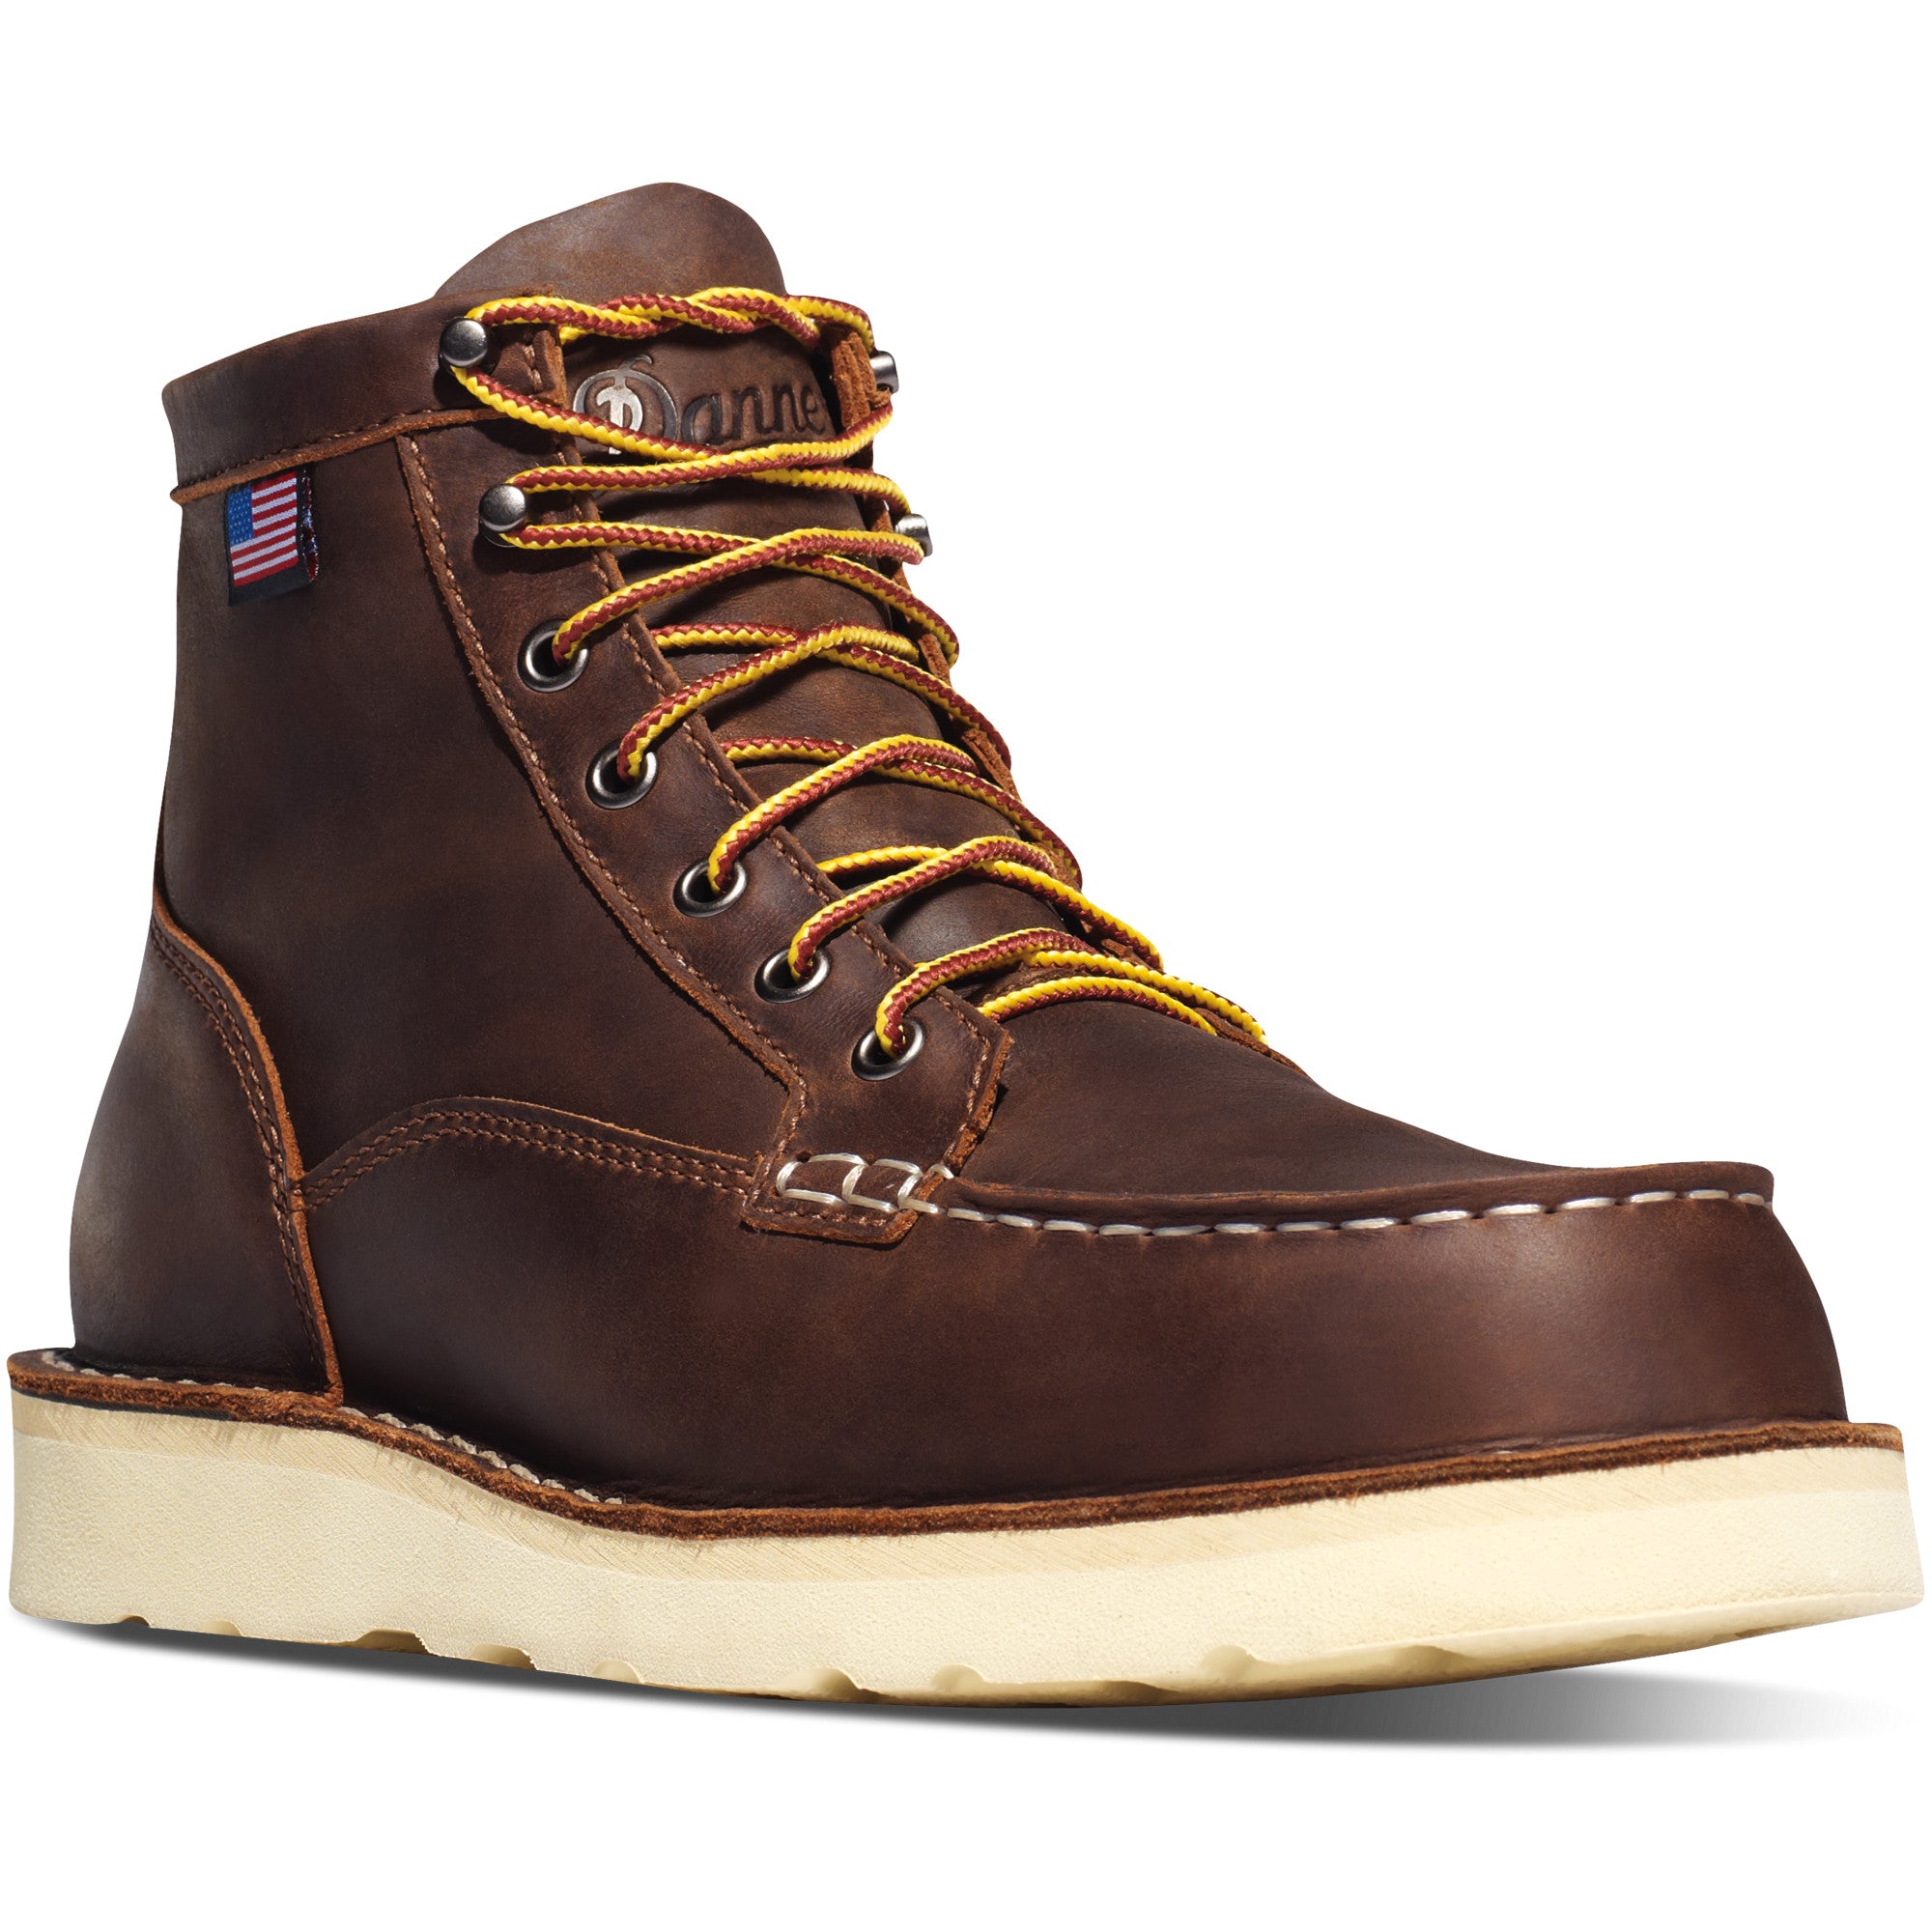 Bull Run Moc Toe 6" Work Boot in Brown color from the side view